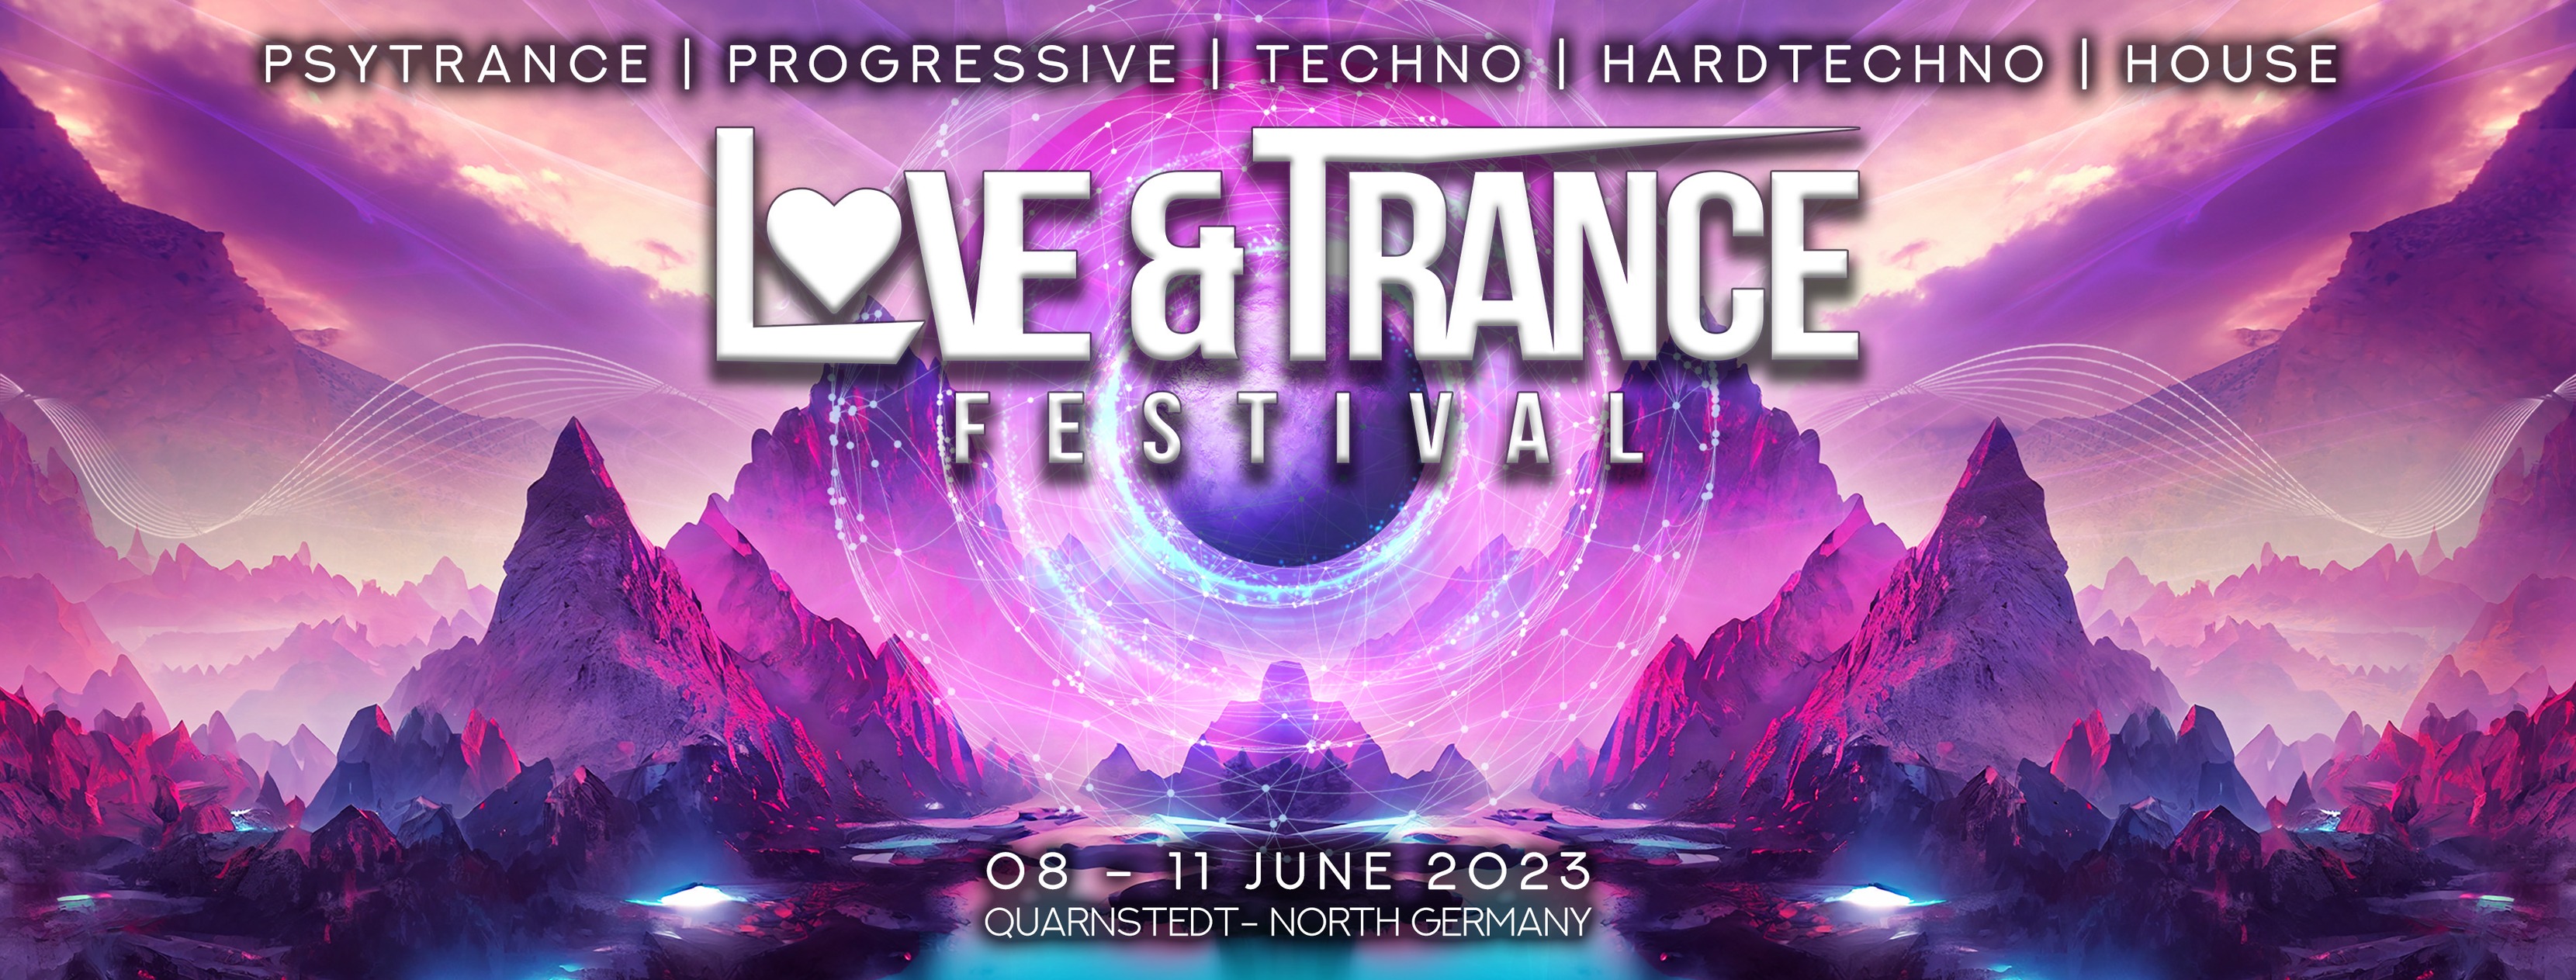 Love and Trance Festival 2023